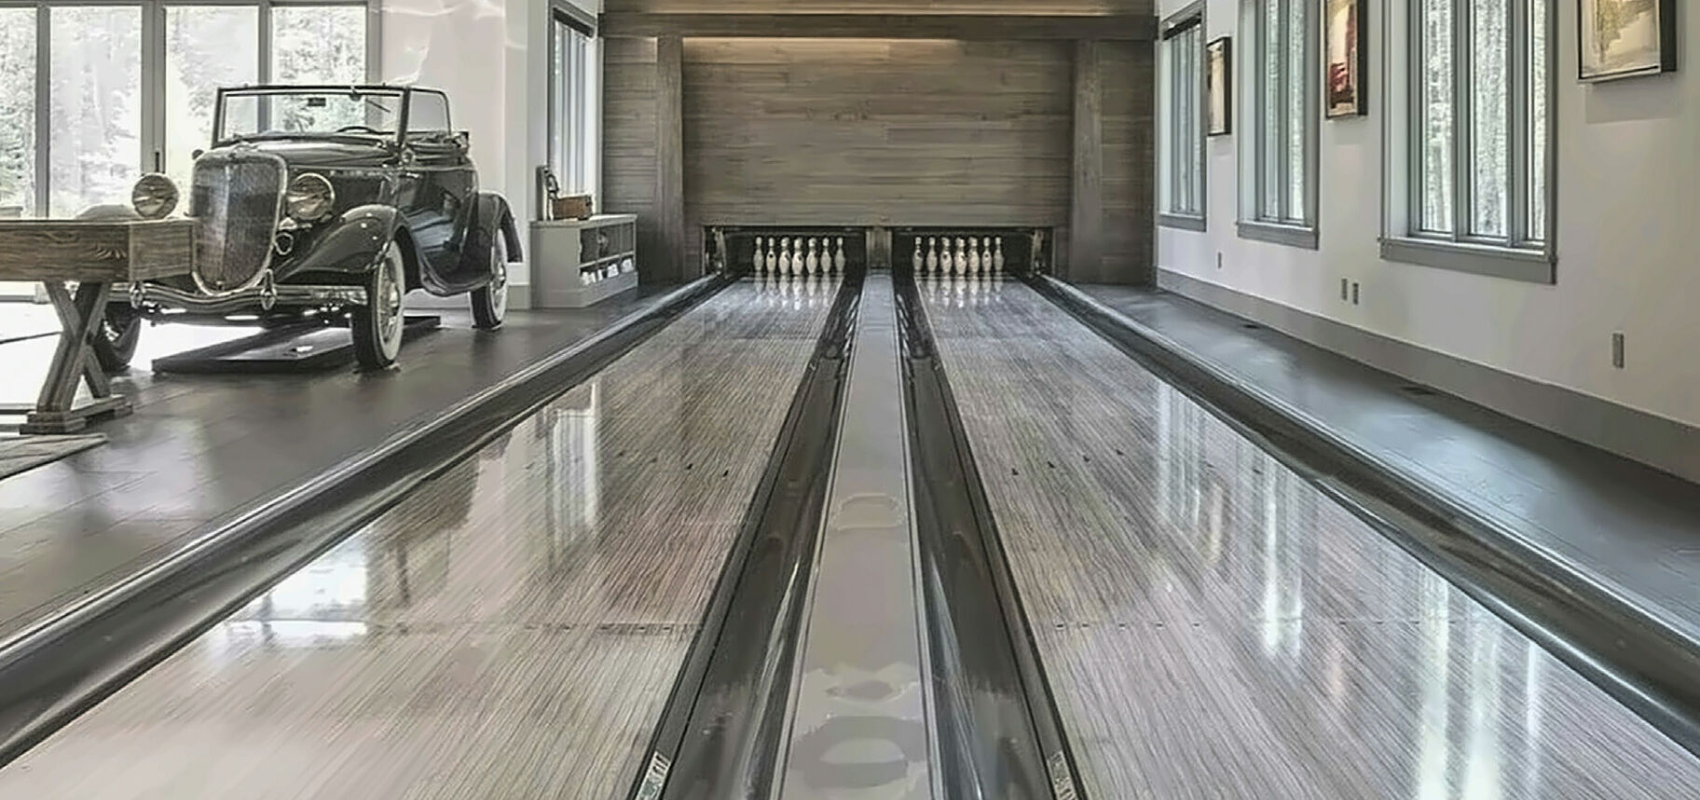 Bowling and gym? Simply at home.